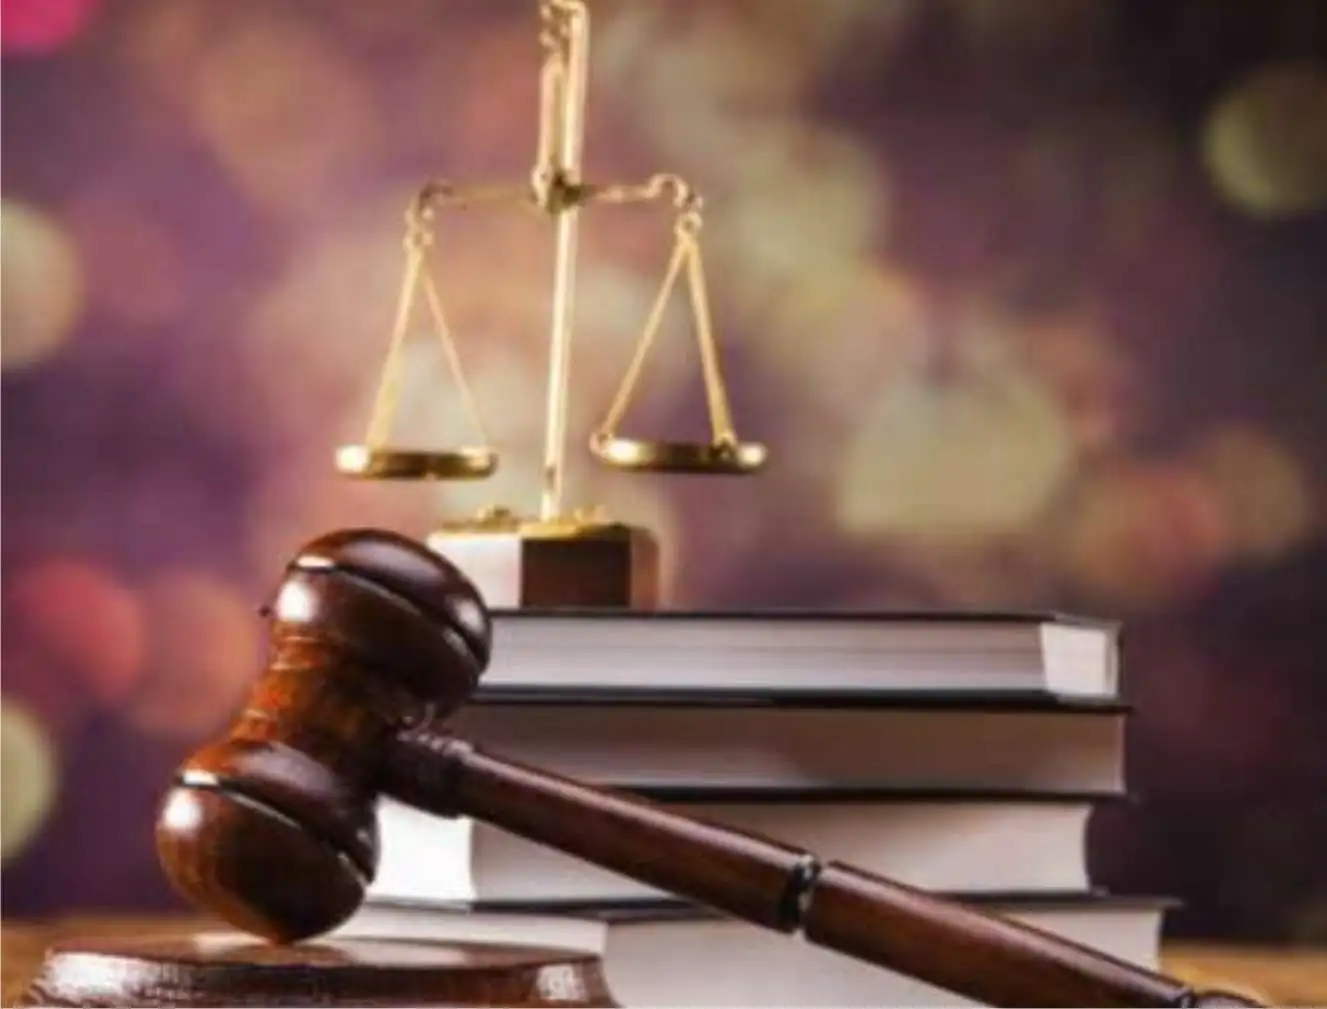 Court remands two over theft of motorcycle